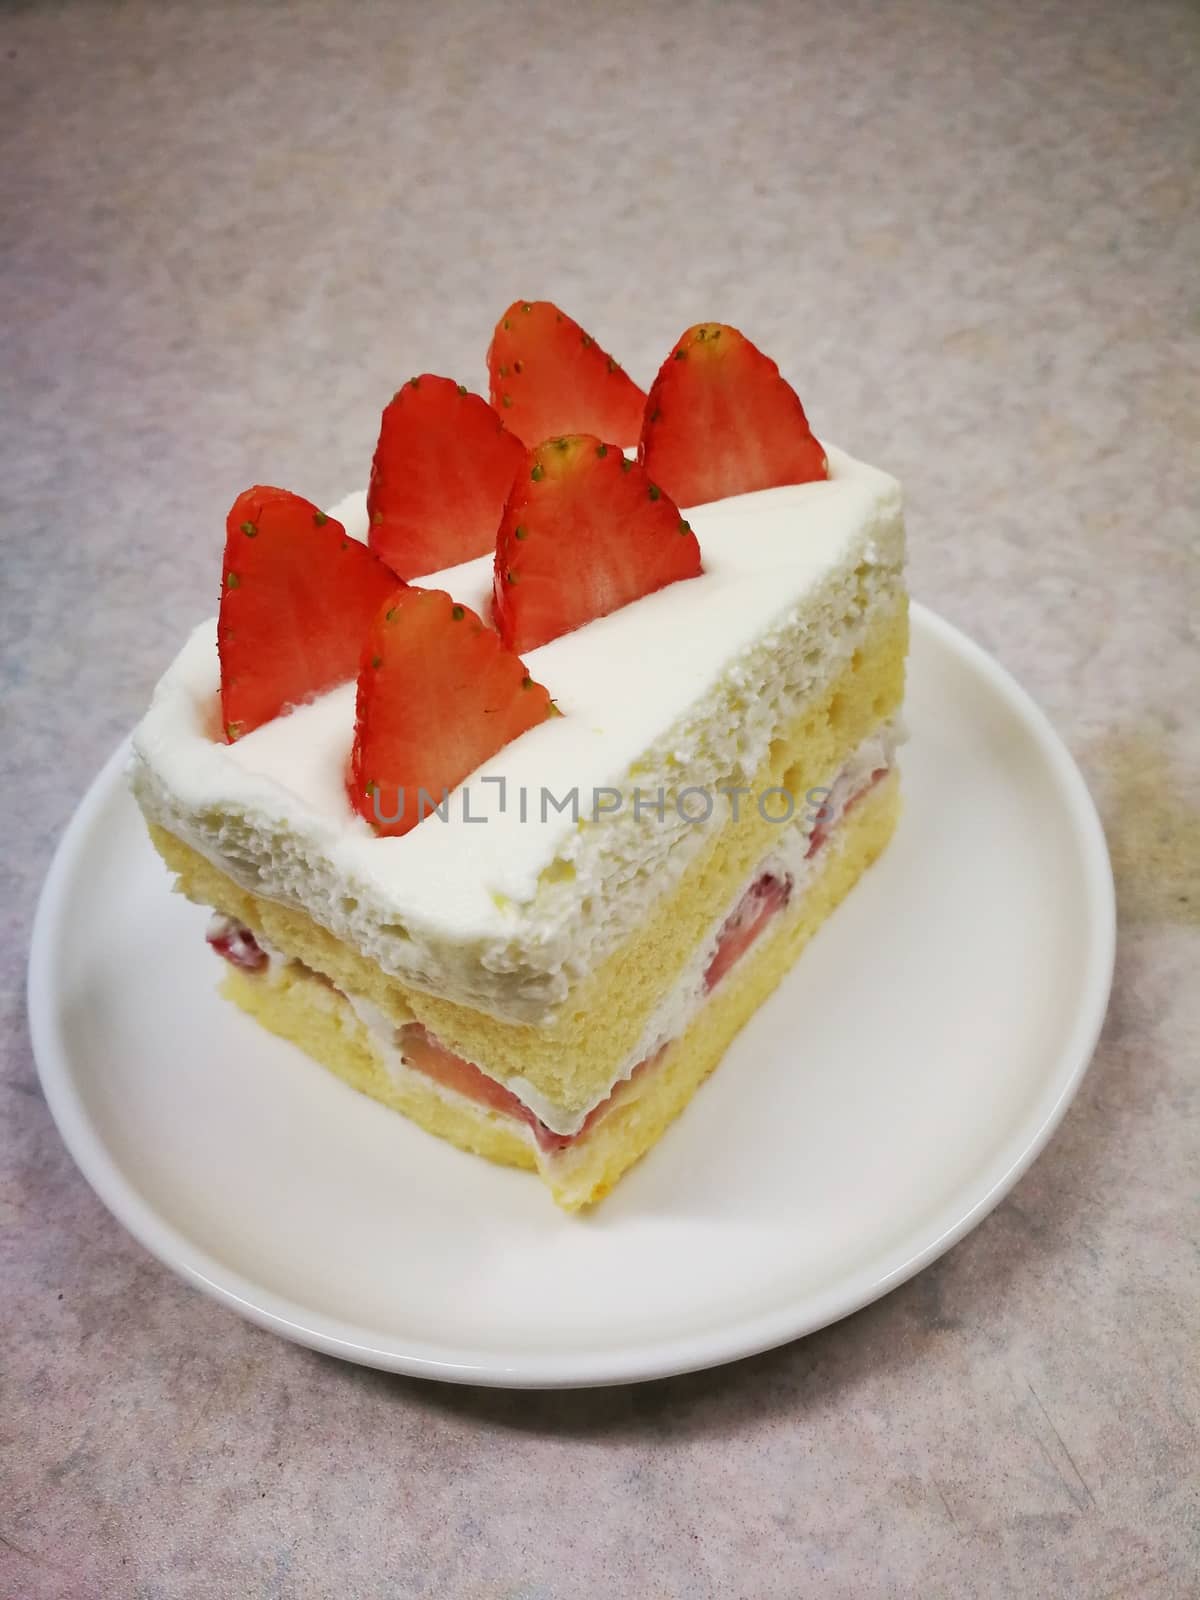 strawberries mouse cake  sweet homemade cake of  Thailand desser by shatchaya